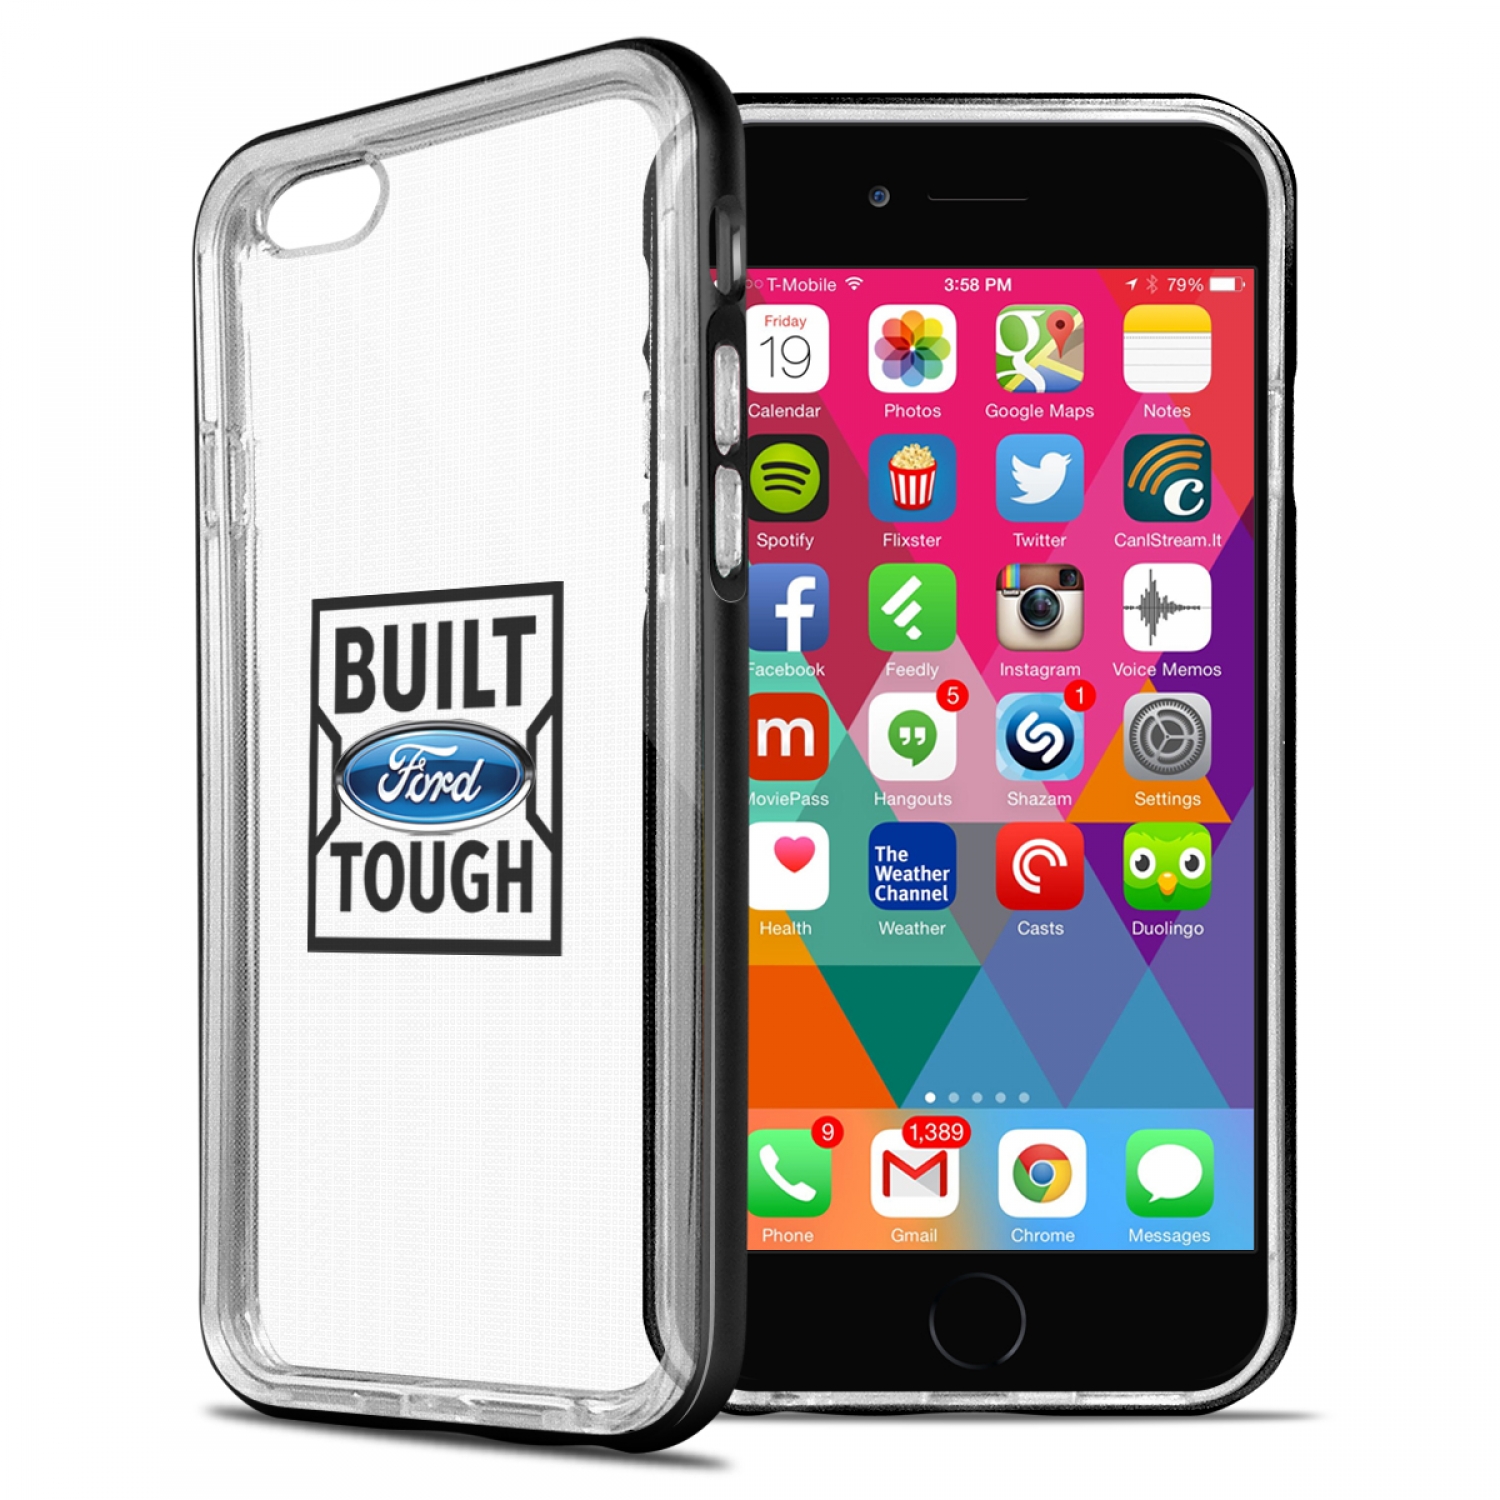 Ford Built Ford Tough iPhone 6 6s Shockproof Clear TPU Case with Metal Bumper Hybrid Phone Case